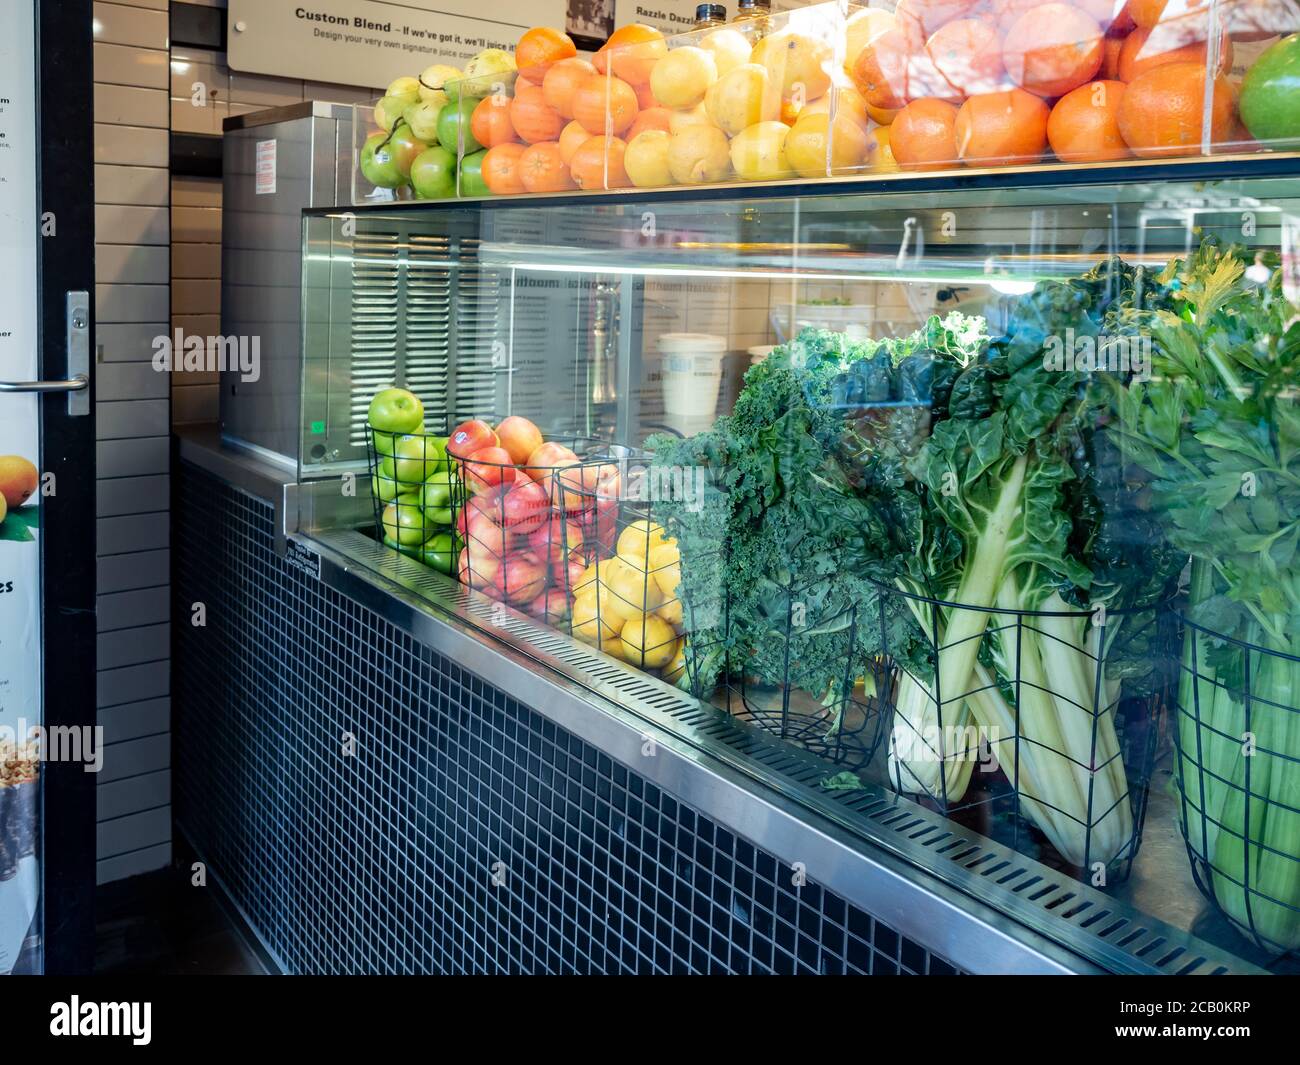 Sydney June 1st 2020 - Kale and Fruits and vegetables background blur on display Stock Photo